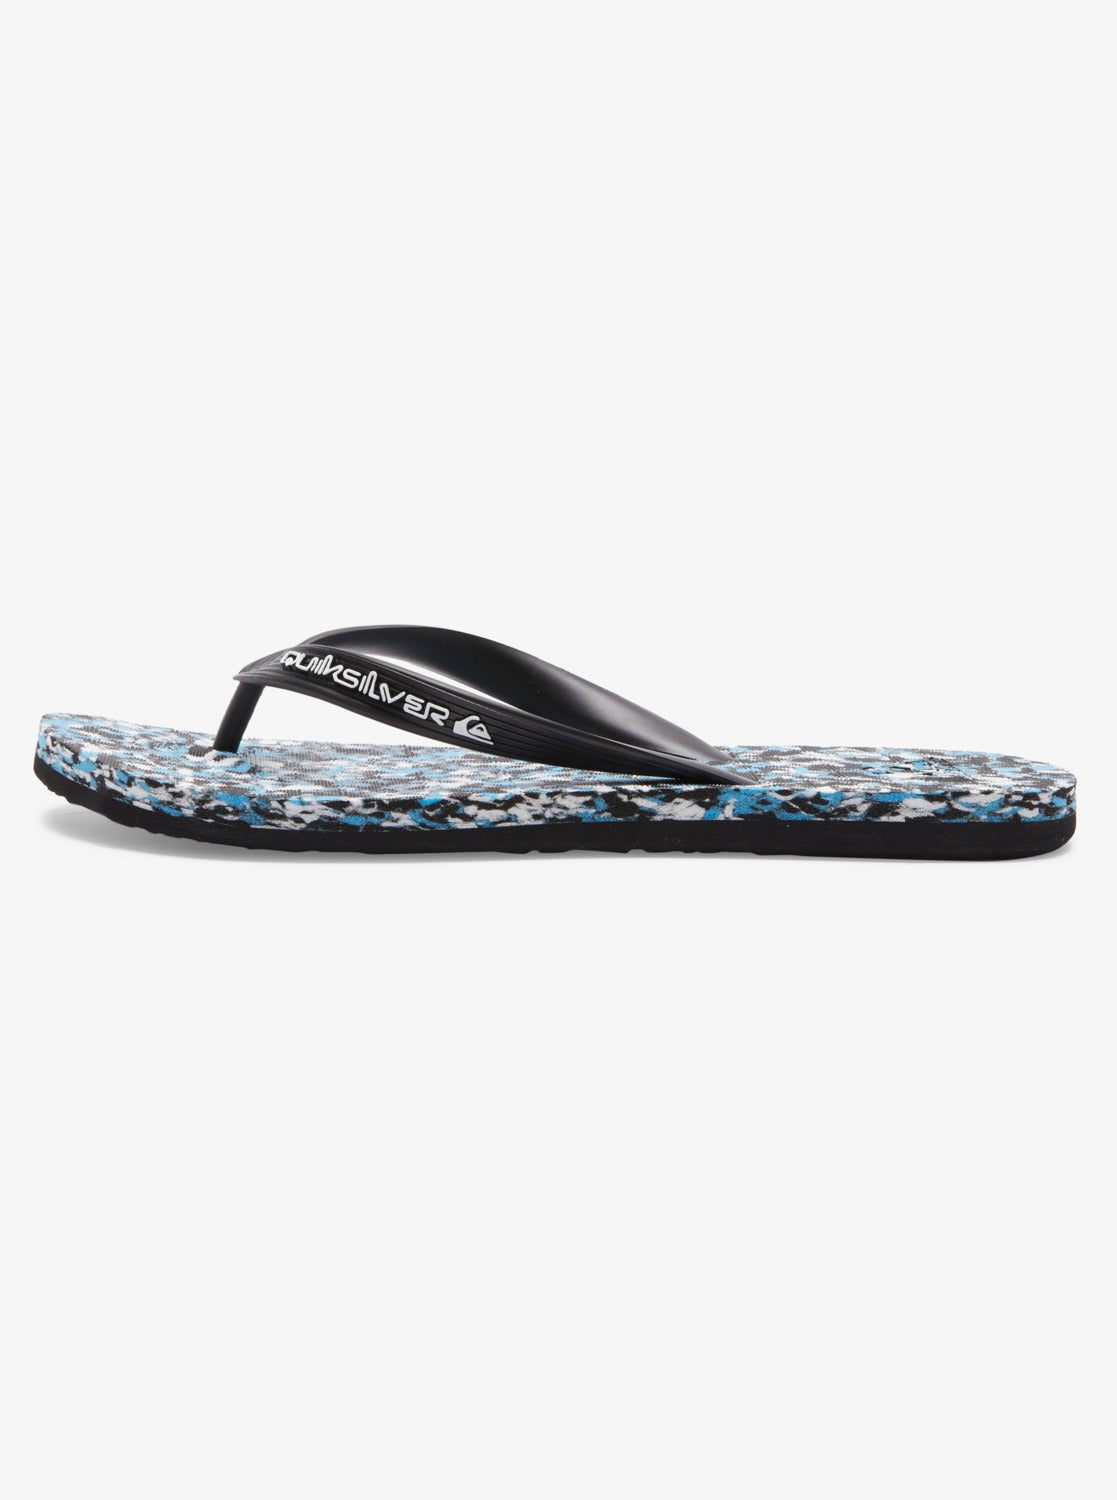 Quiksilver Molokai SANDALS 3 Point FLIP FLOP Thongs SANDAL SHOES Priced  CHEAP Black Size 9 - $29 (57% Off Retail) - From Bully